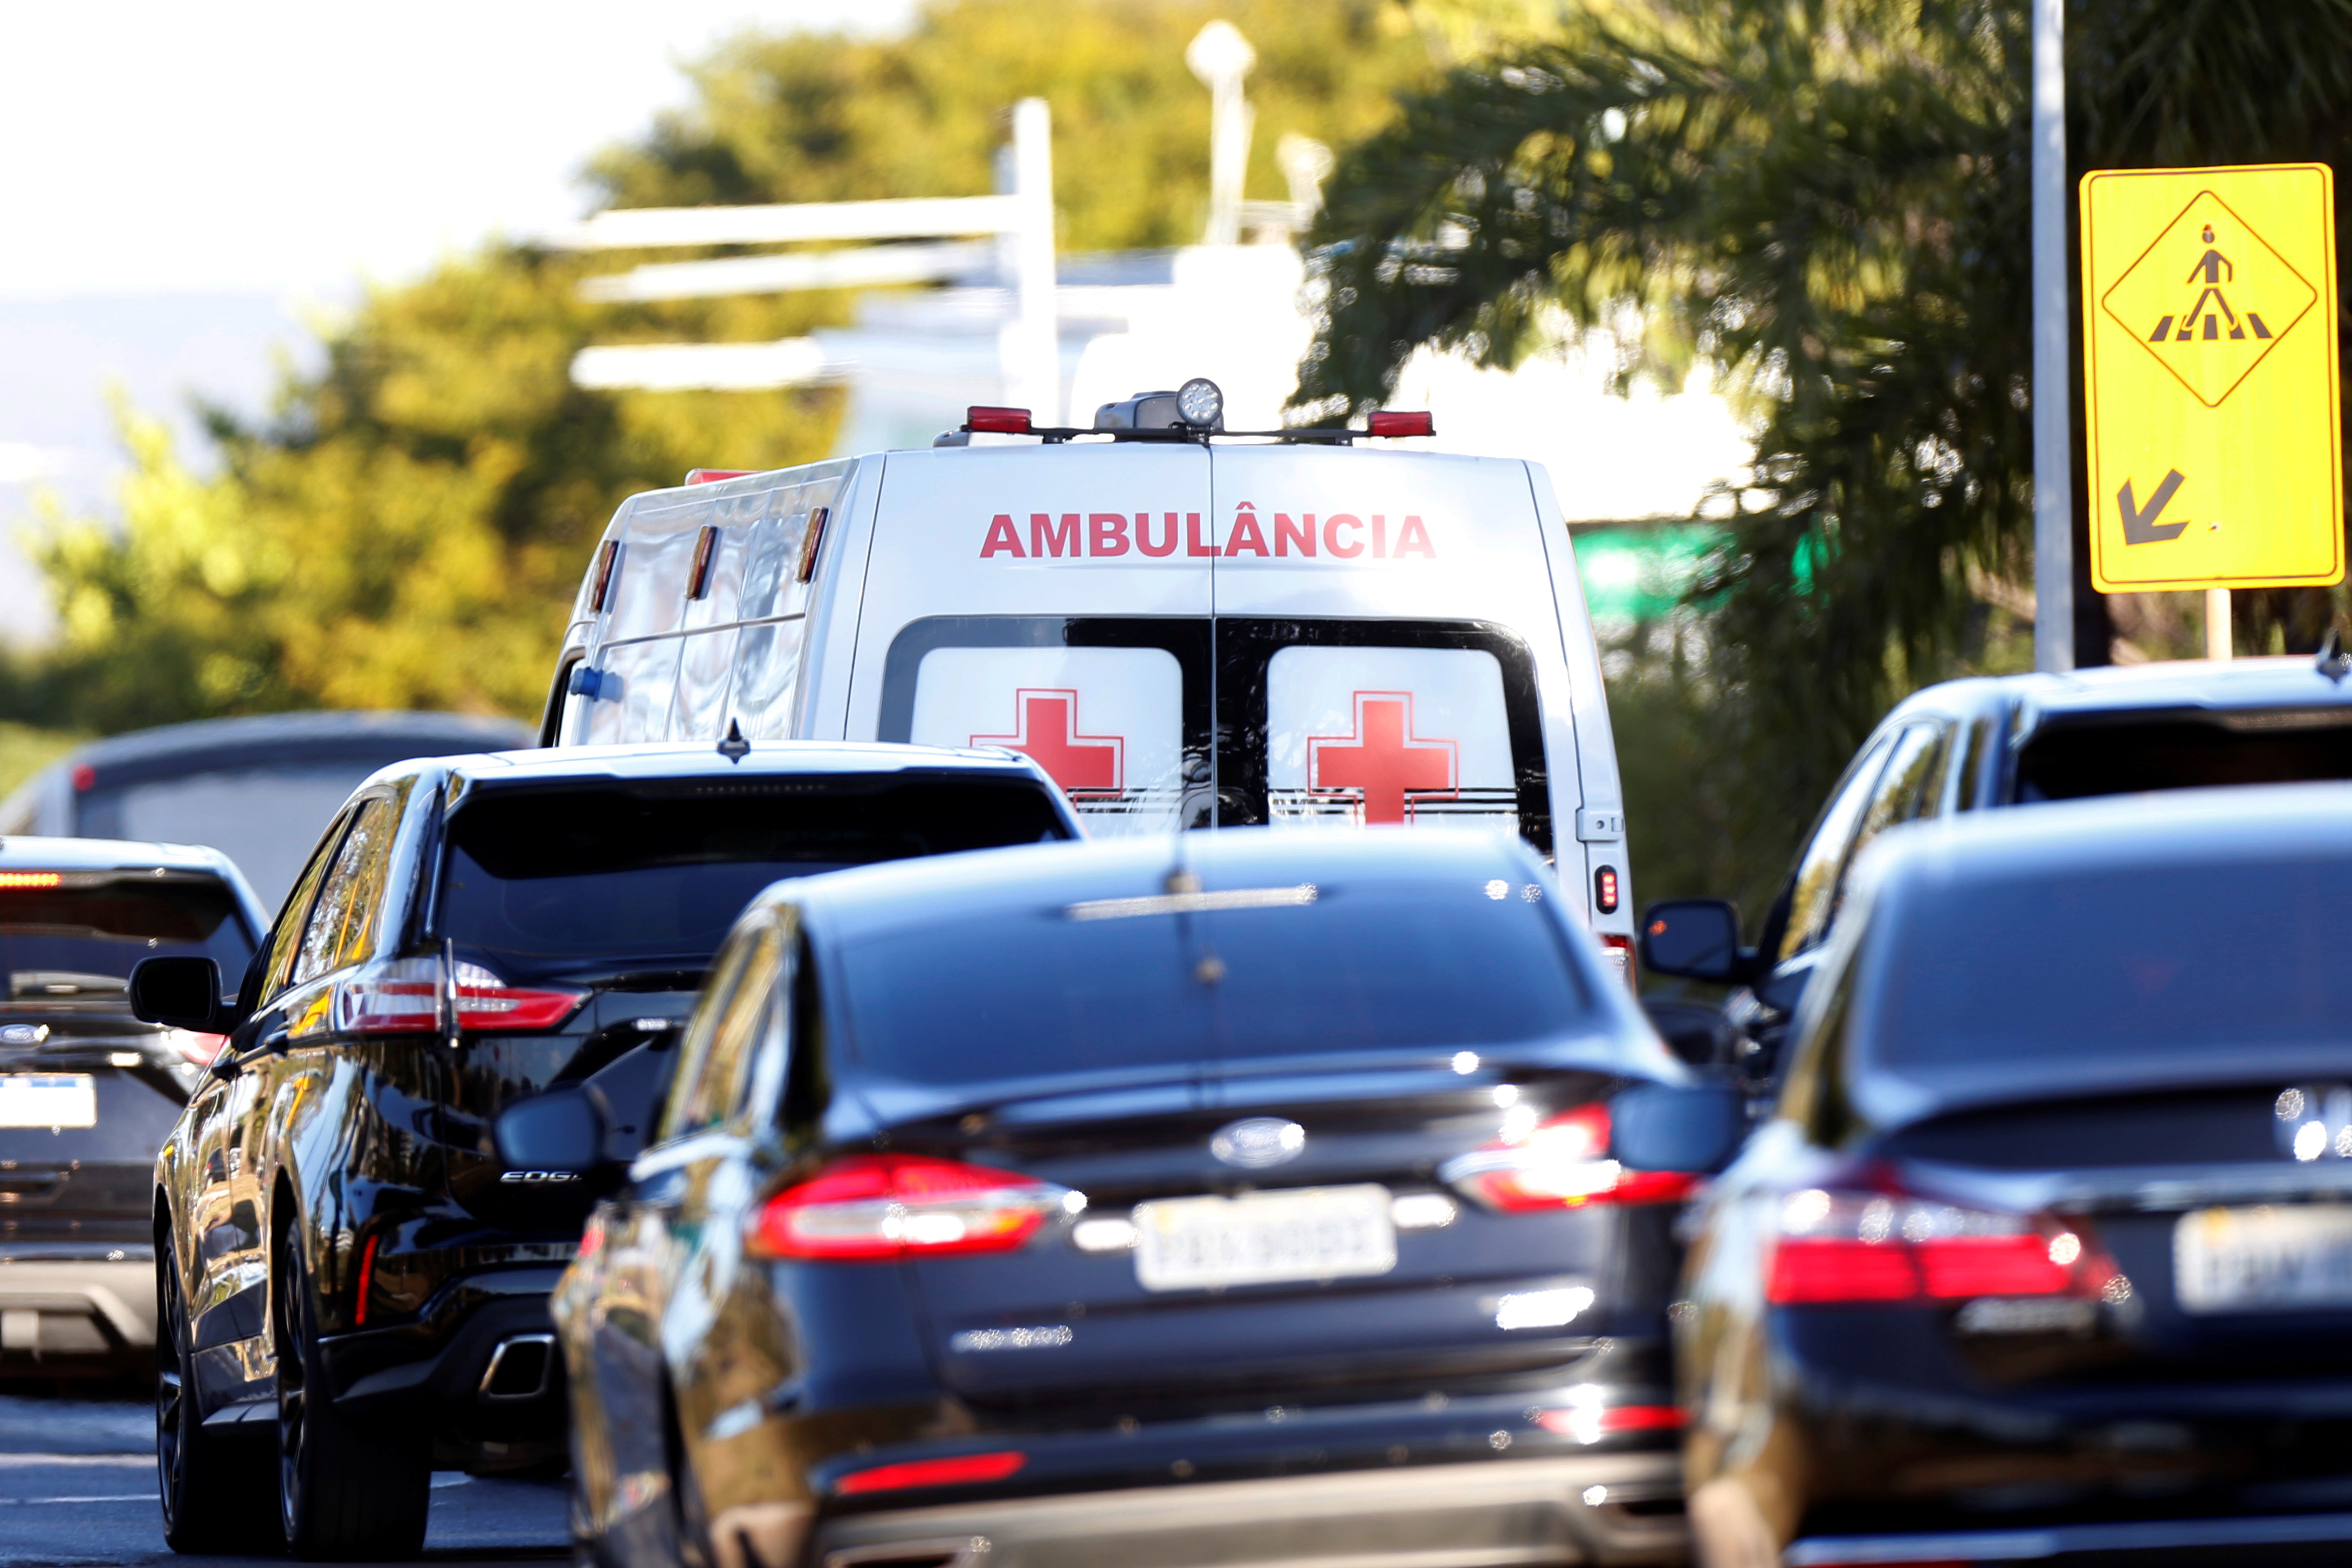 A presidential convoy with an ambulance transporting Brazil's President Jair Bolsonaro leaves the armed forces hospital (HFA) in Brasilia